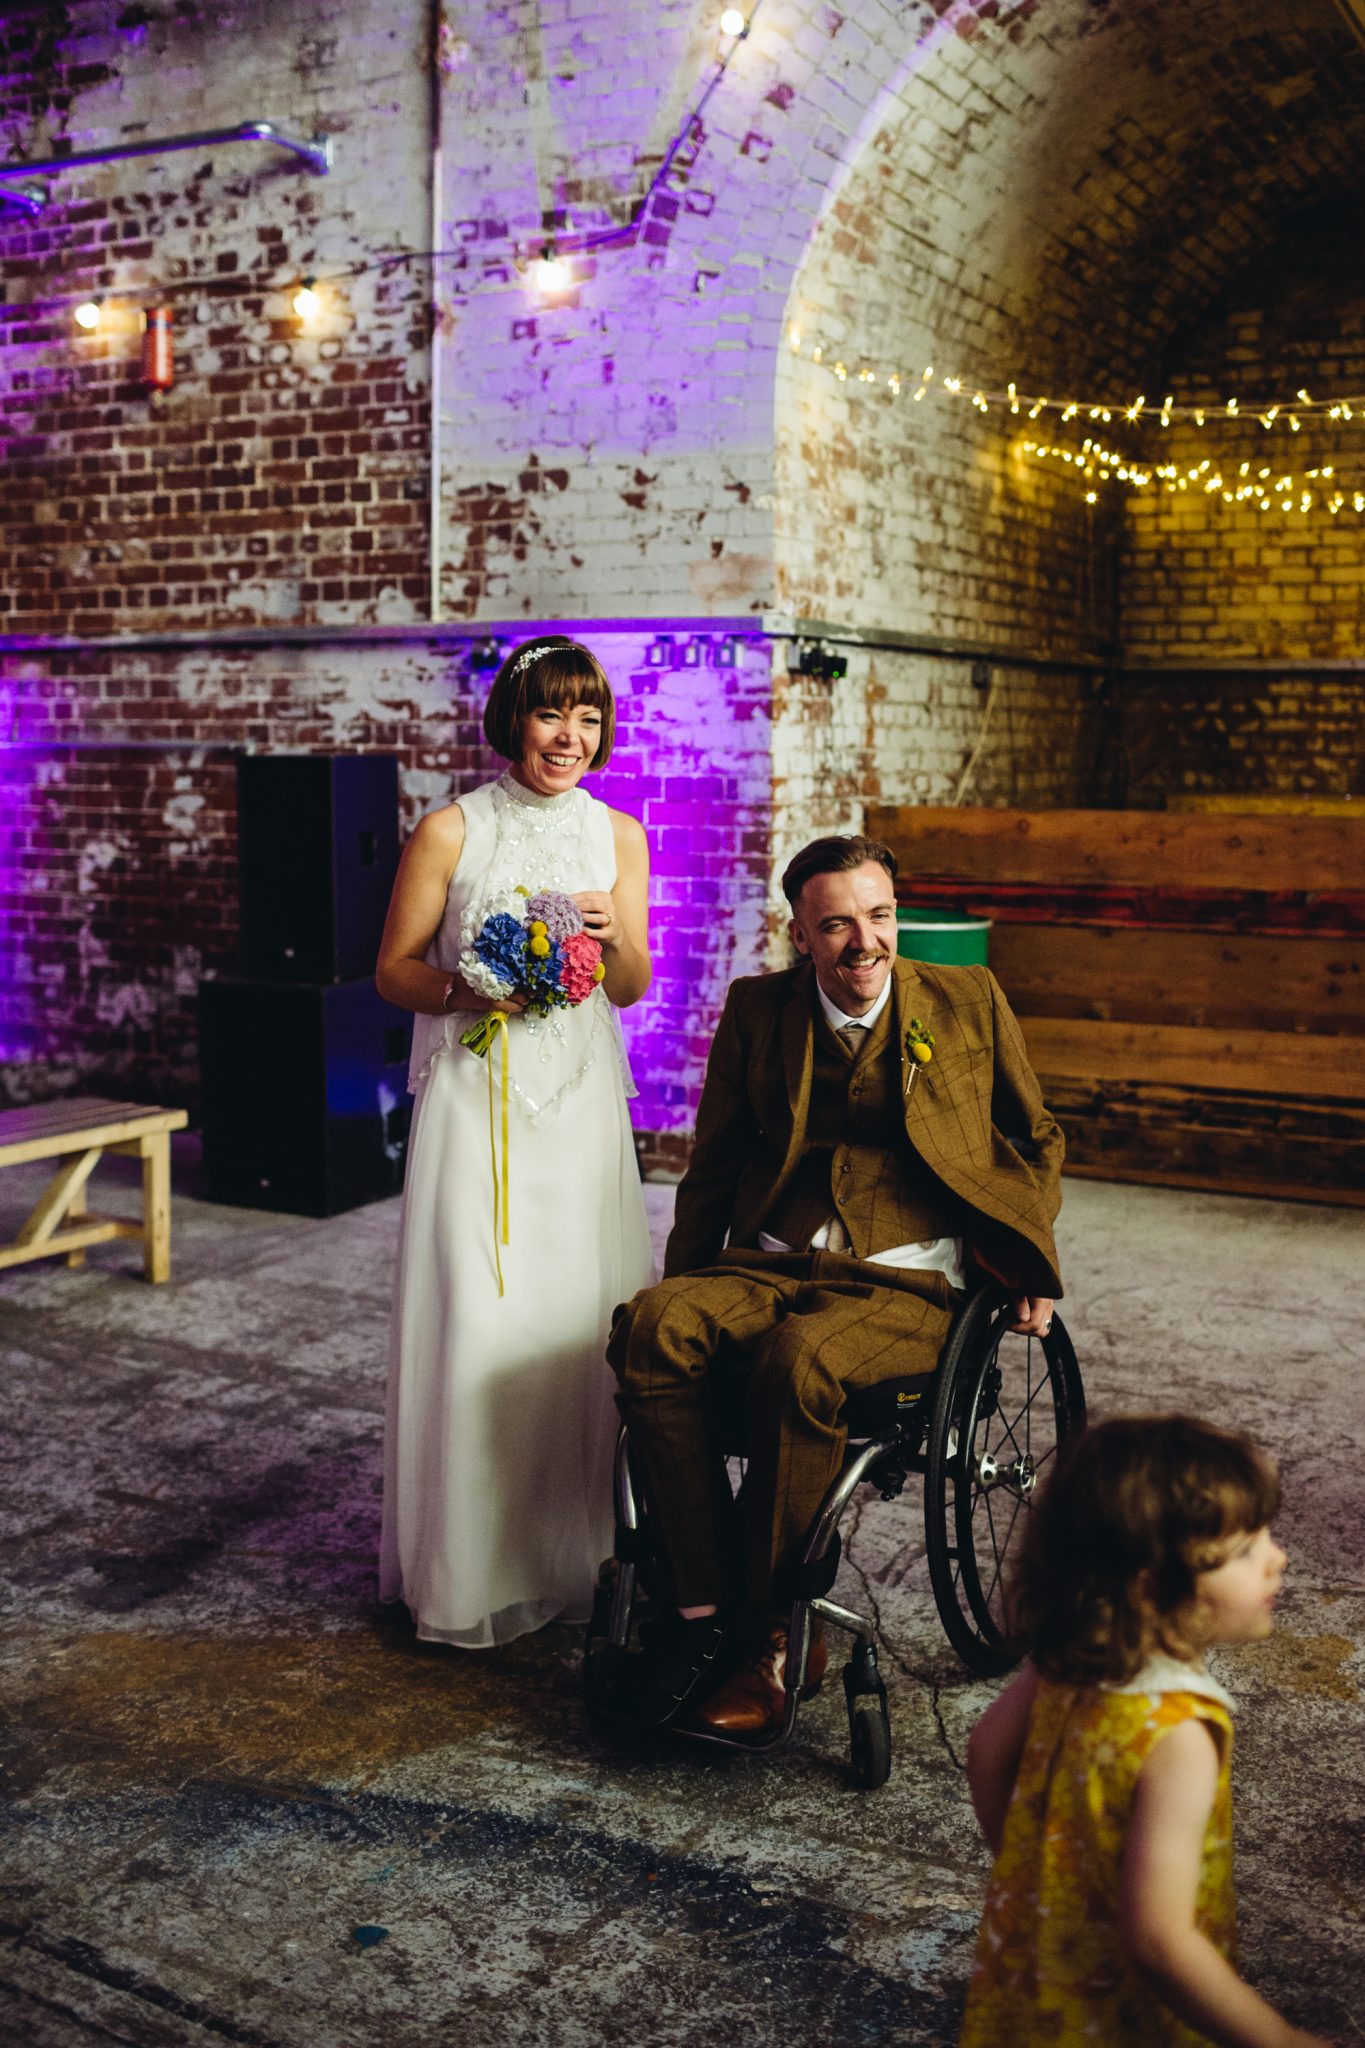 01 Disabled groom in a wheelchair on his wedding day